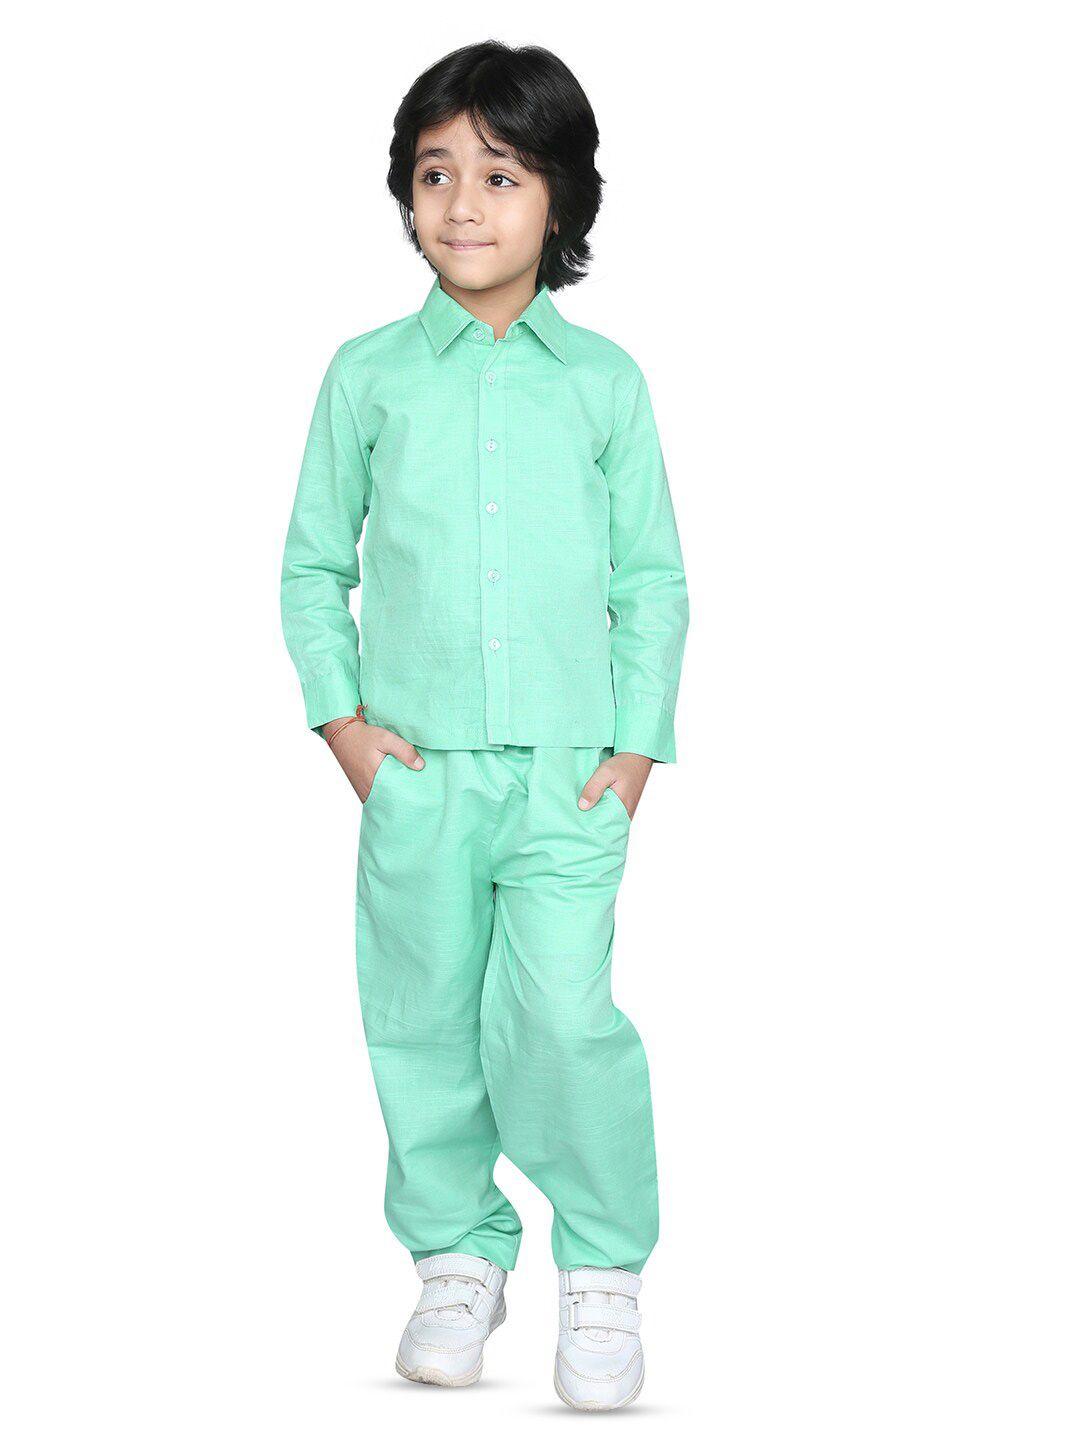 zip zap zoop boys pure cotton shirt with trousers